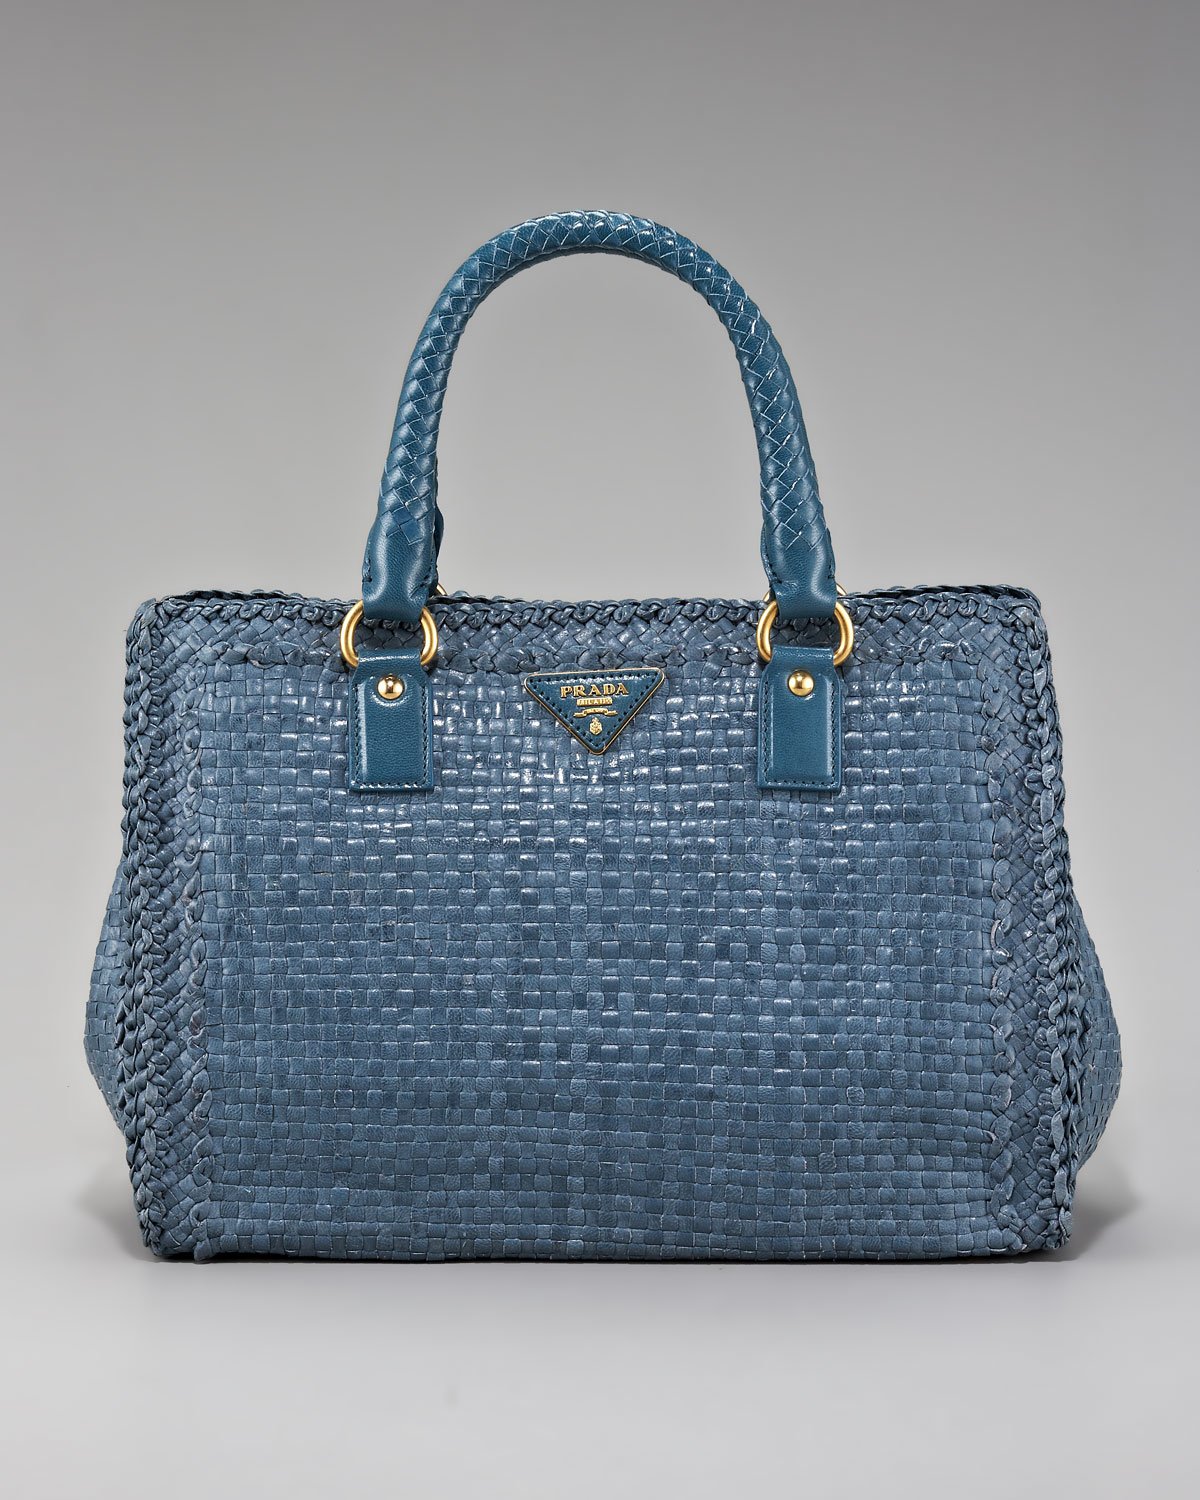 Lyst - Prada Madras Woven Leather Tote in Blue